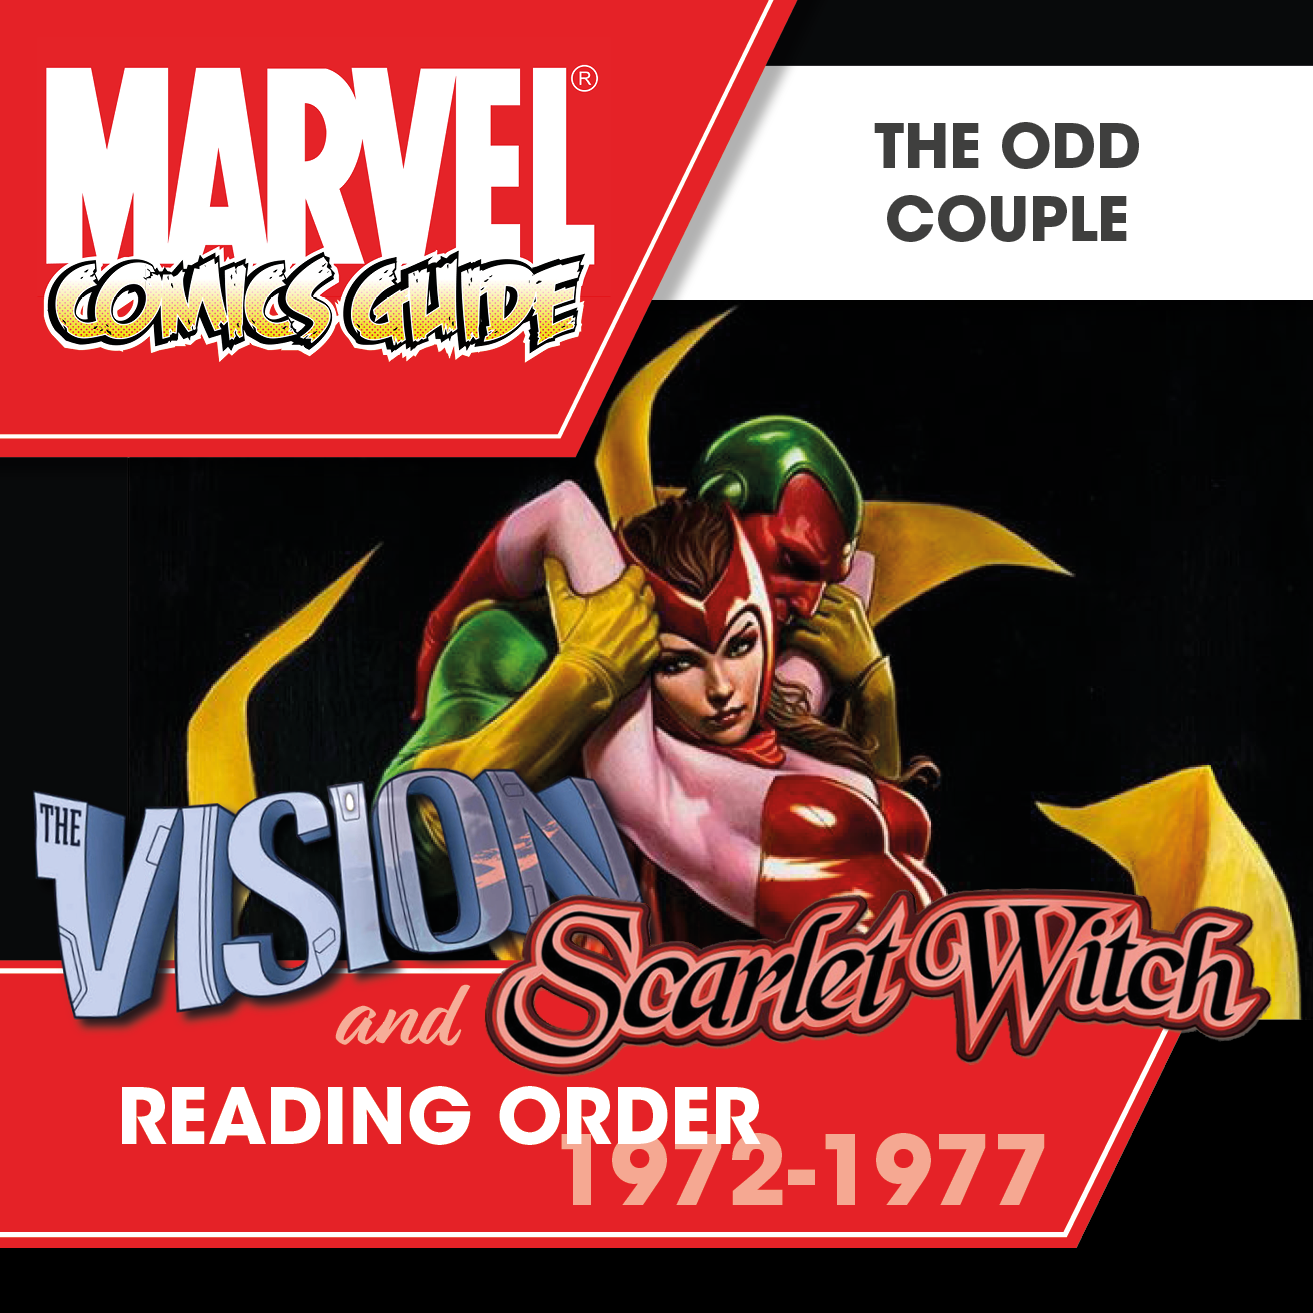 Vision and the Scarlet Witch Comics Hint at WandaVision Plot